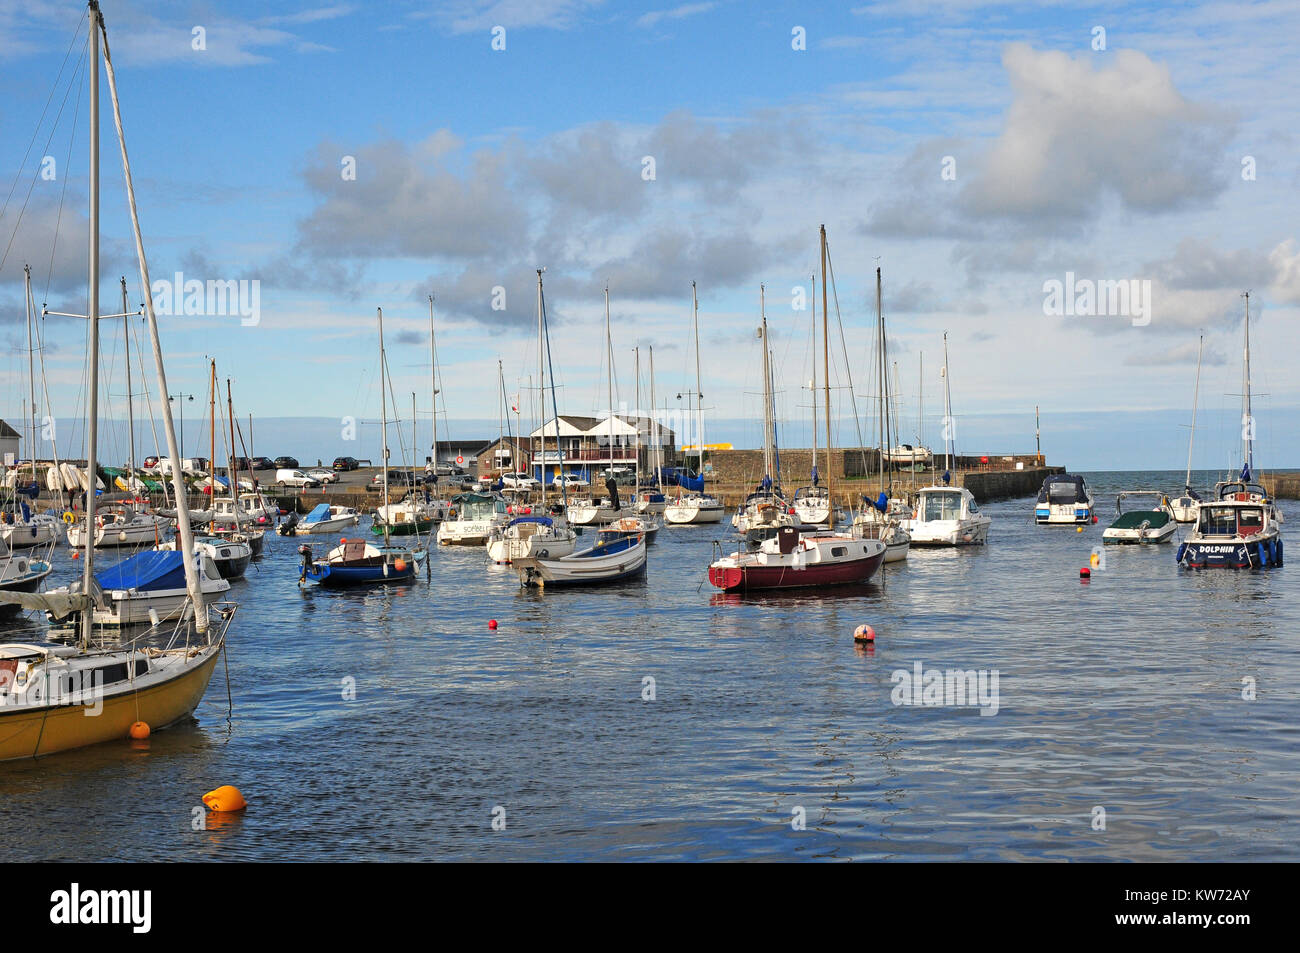 Boats in the harbour at. Aberaeron, Ceredigion, Wales. Stock Photo